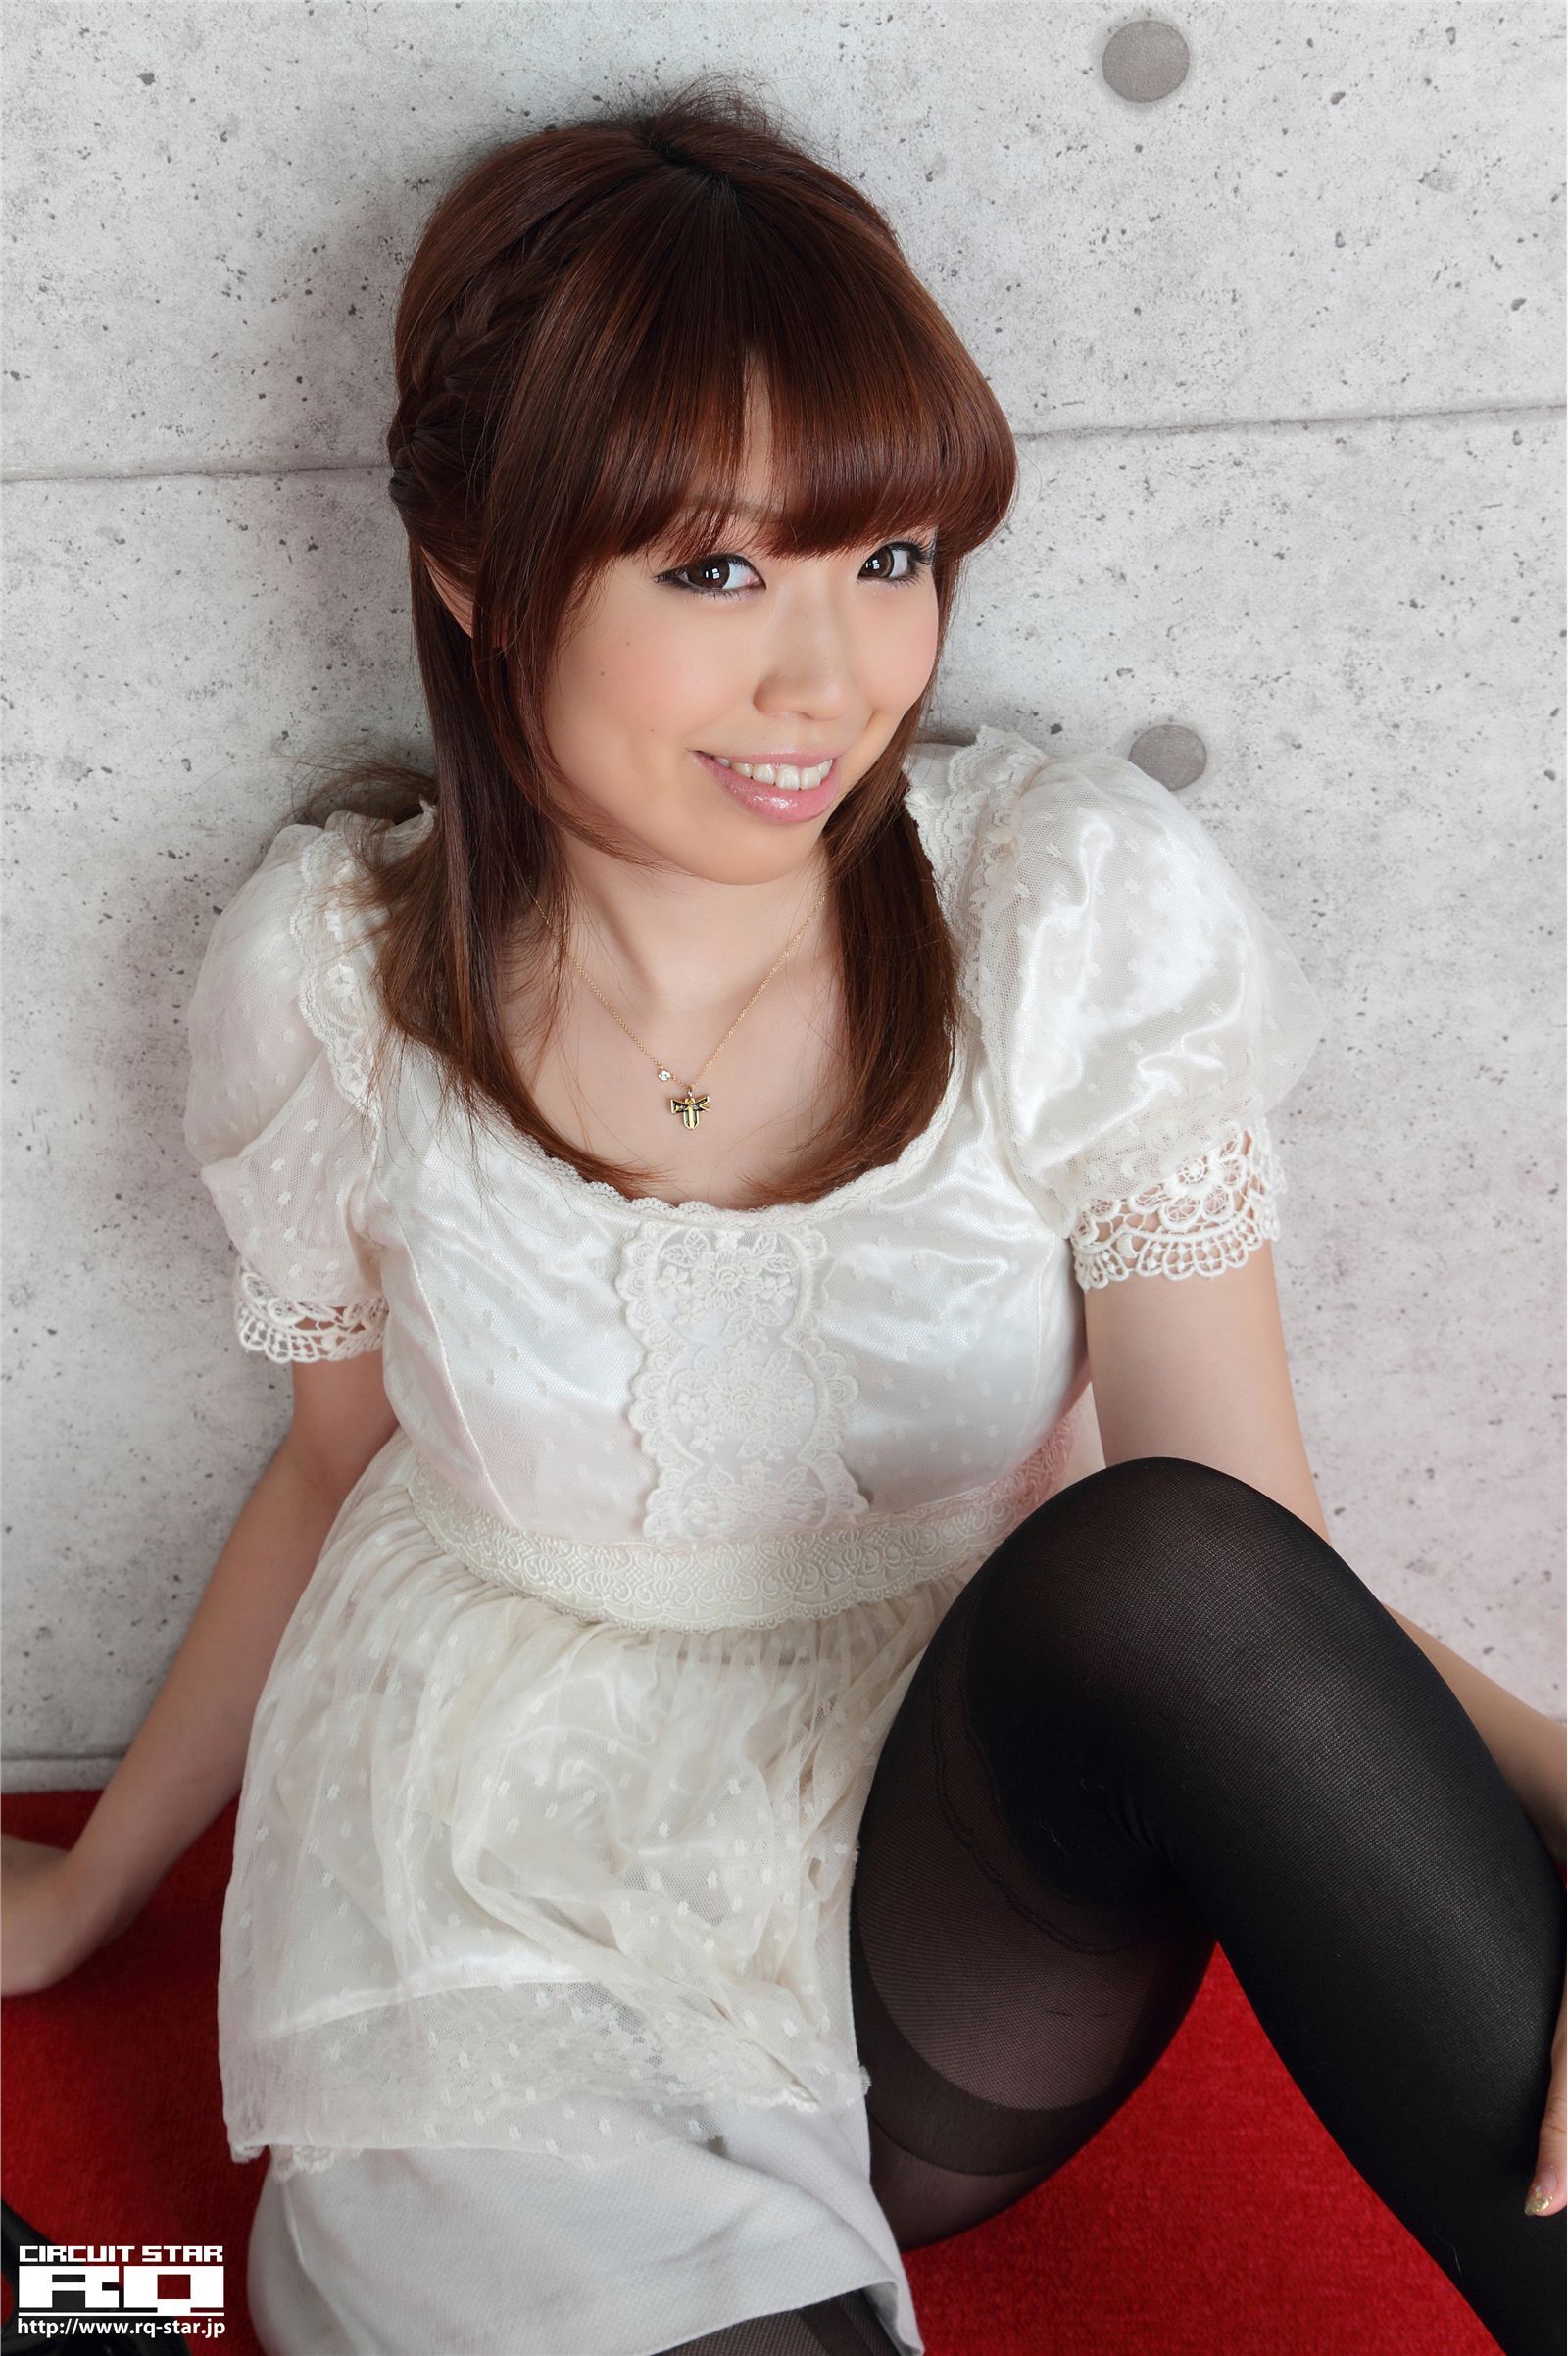 Kawasaki [RQ star] [02-08] no.00599 the most complete picture resources of Japanese beauties